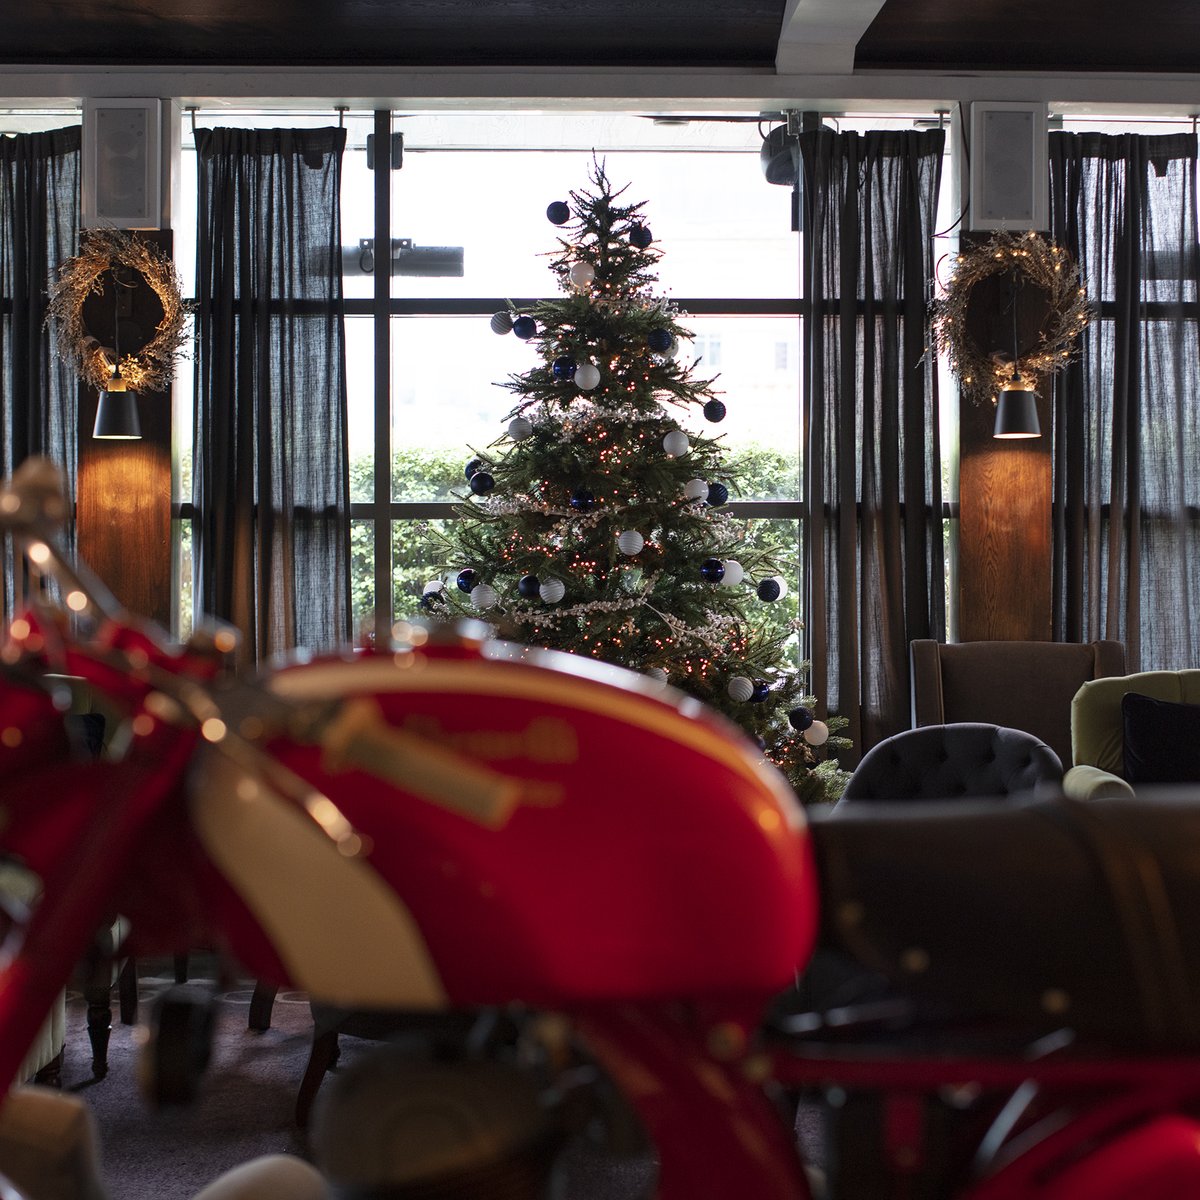 It's the season to be jolly! We're Christmas ready at Eight Club. How excited are you?

#Liverpoolstreet #EightClubMoorgate #Privatemembersclub #London